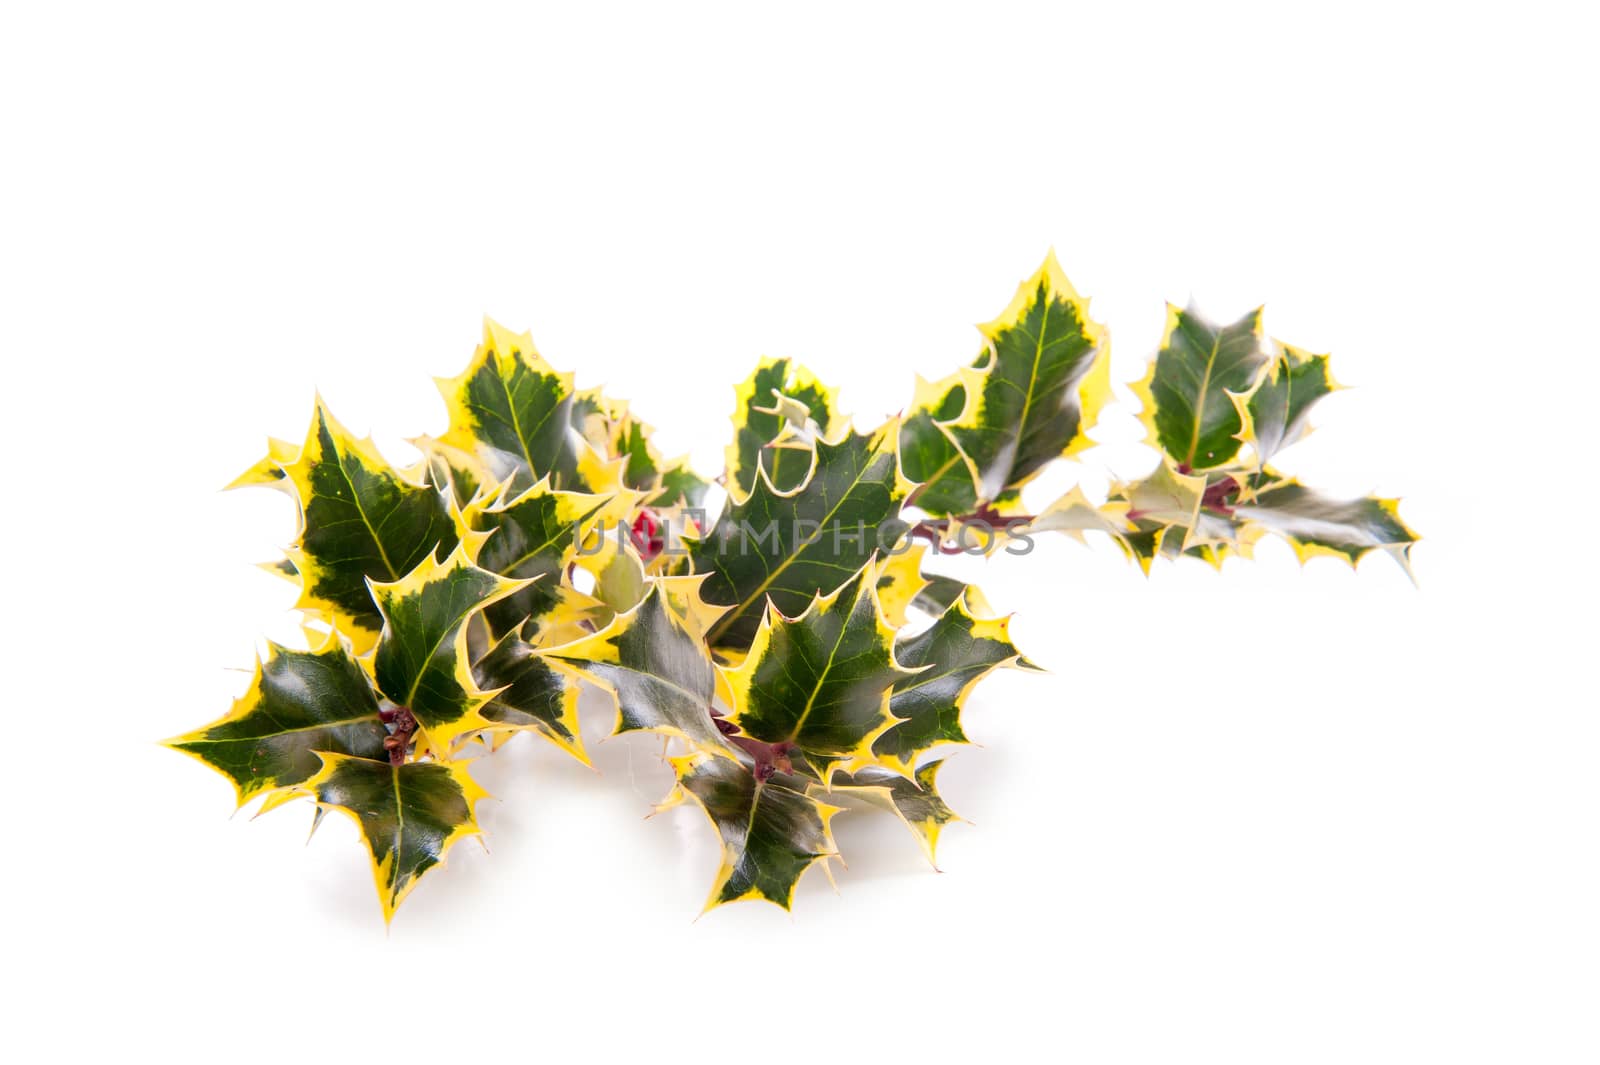 a branch of holly, for Christmas, on a white background